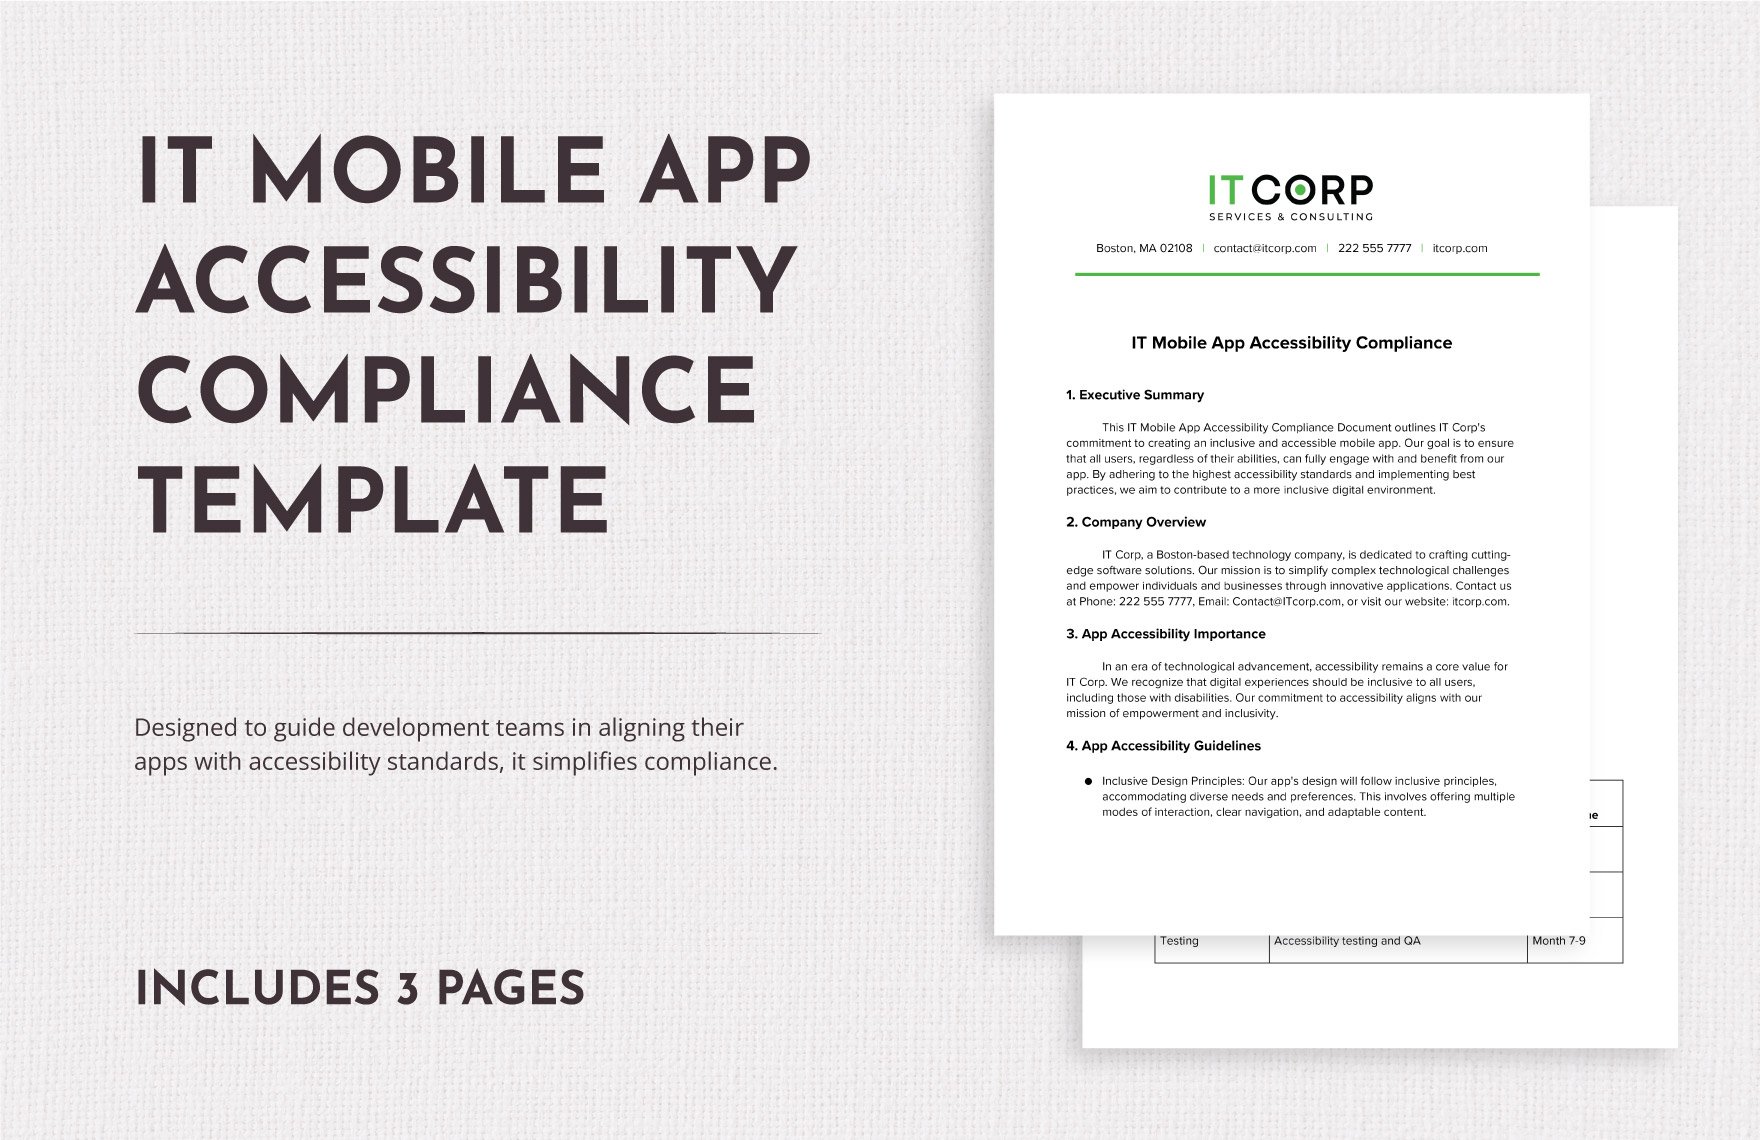 IT Mobile App Accessibility Compliance Template in Word, Google Docs, PDF